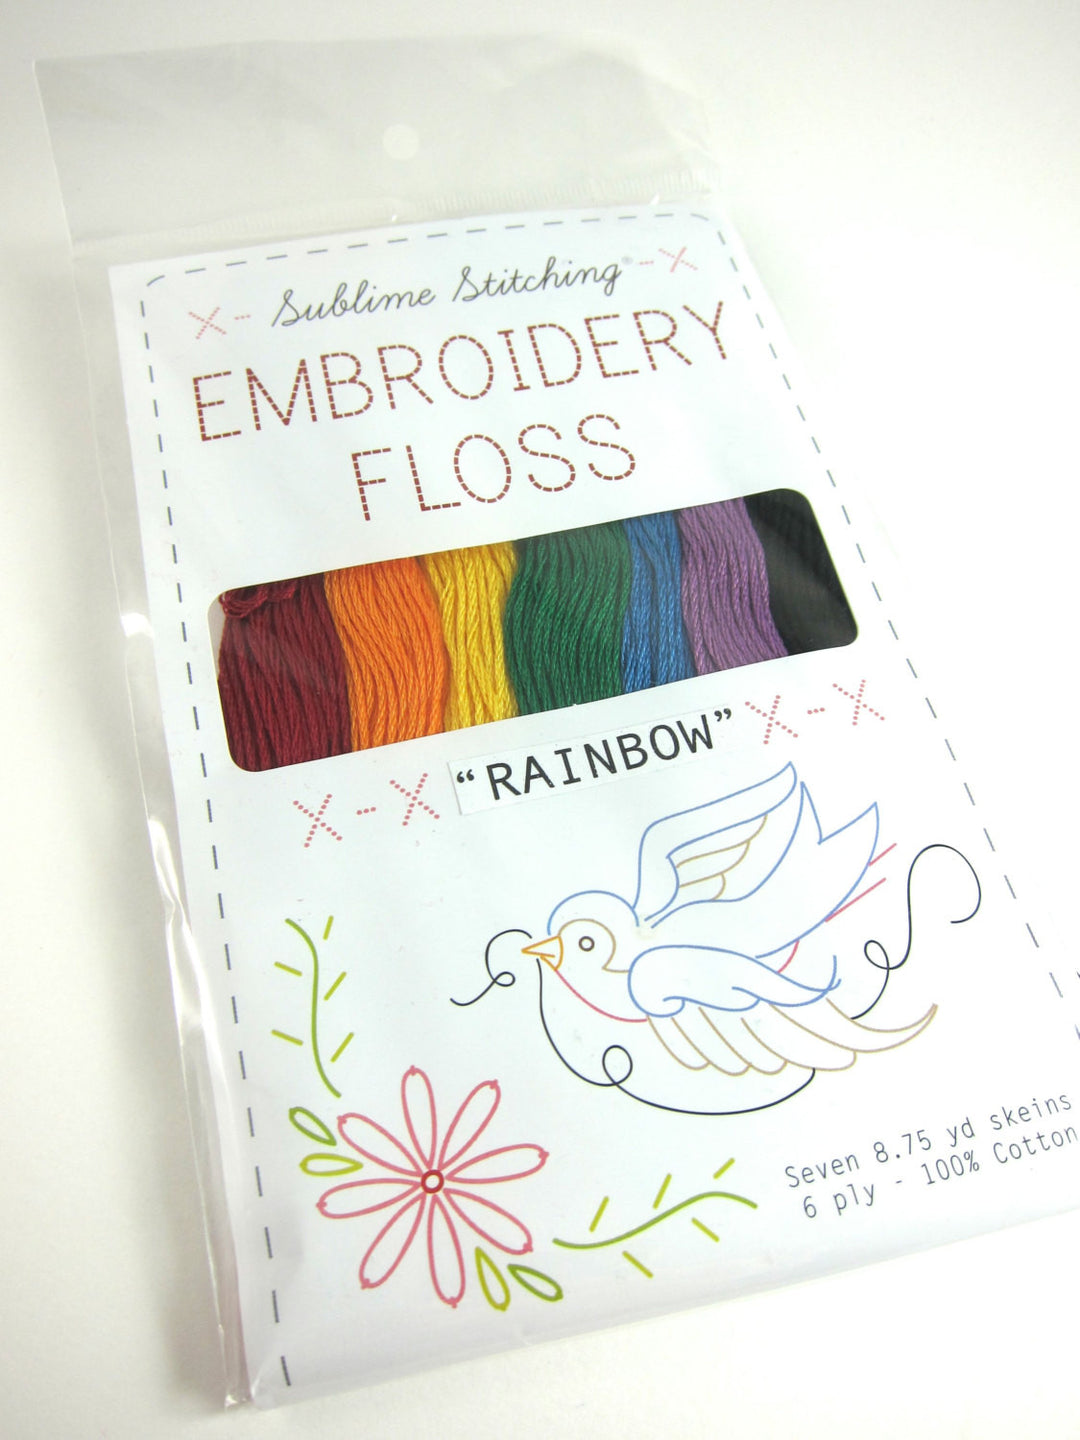  Friendship Bracelet String 50 Skeins Rainbow Color Embroidery  Floss Cross Stitch Embroidery Thread Cotton Floss Bracelet Yarn, Craft  Floss : Arts, Crafts & Sewing